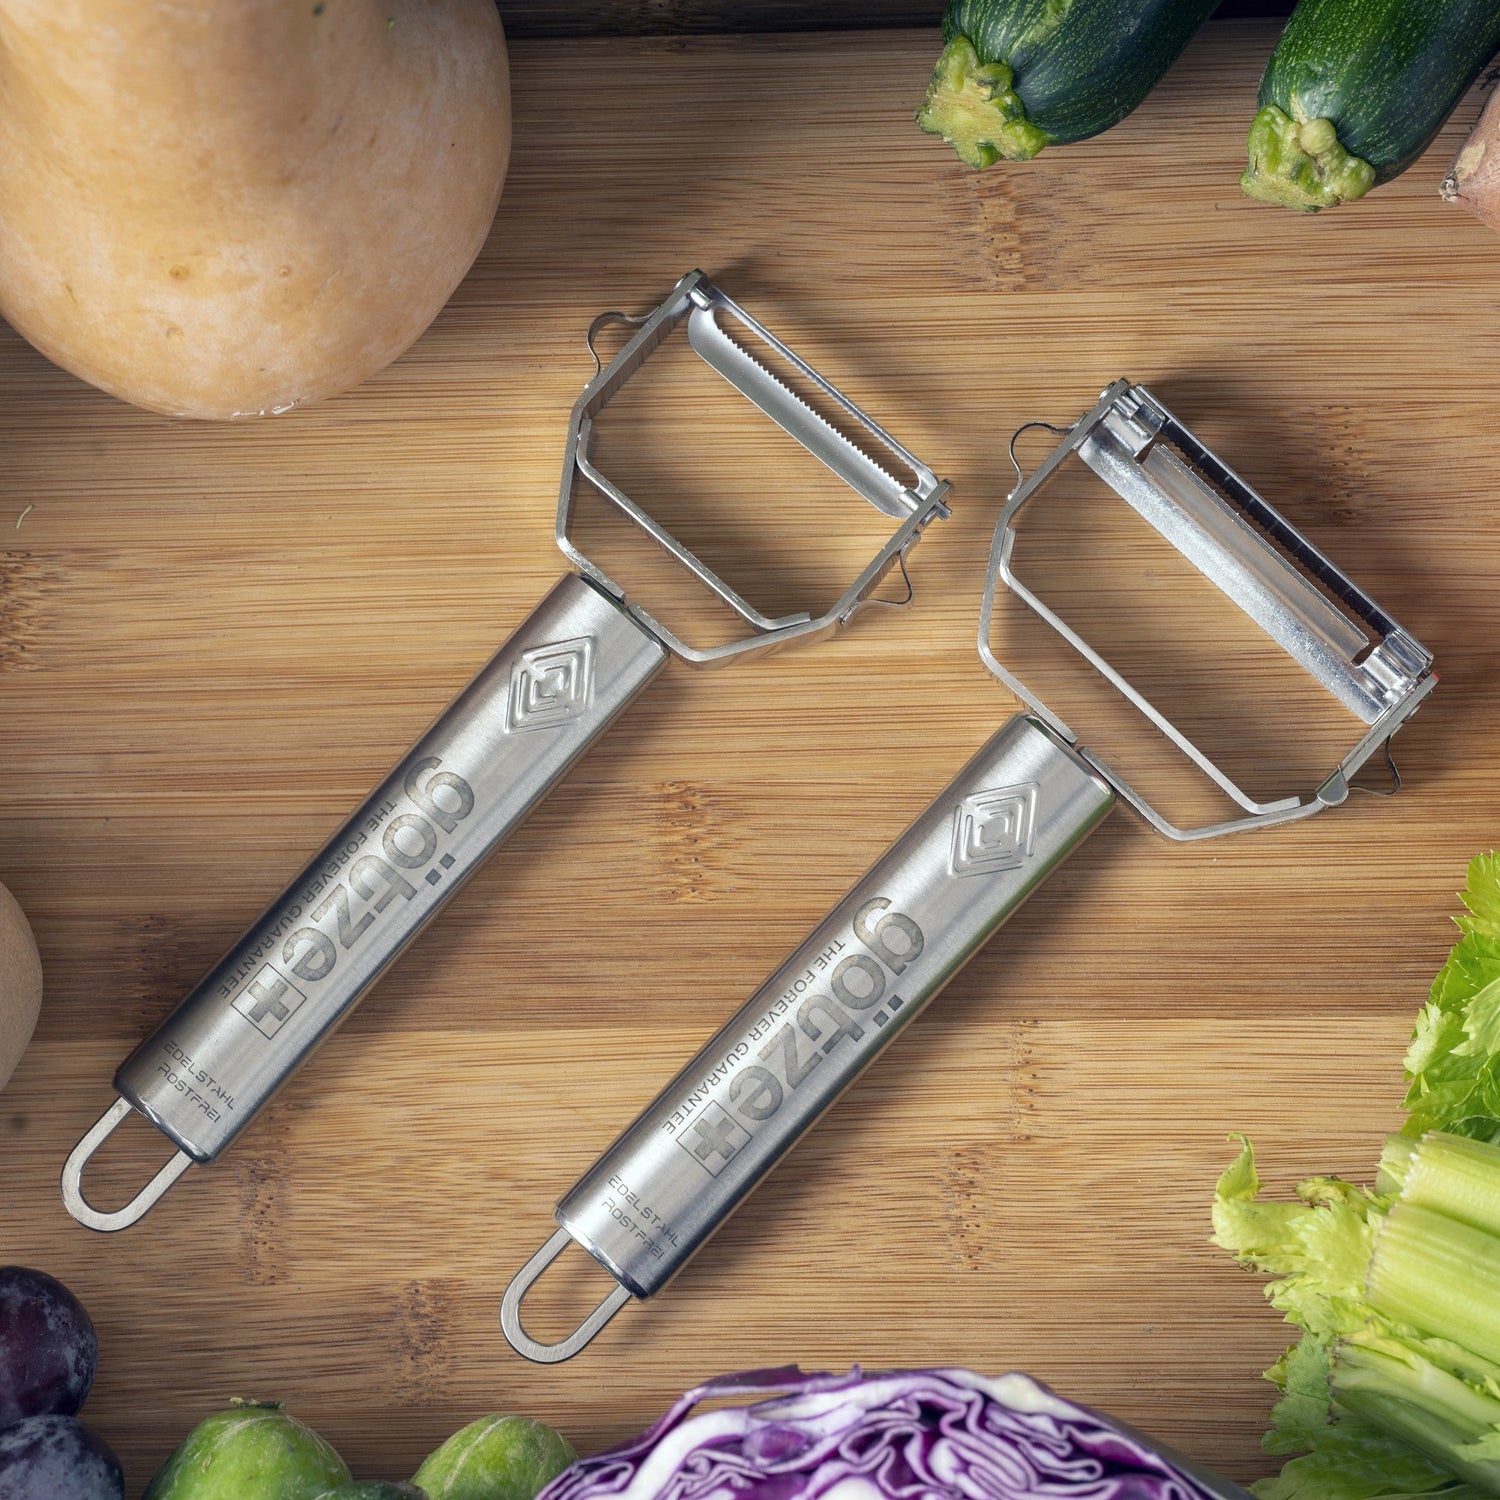 Discontinued Attrezzo Collection Peeler